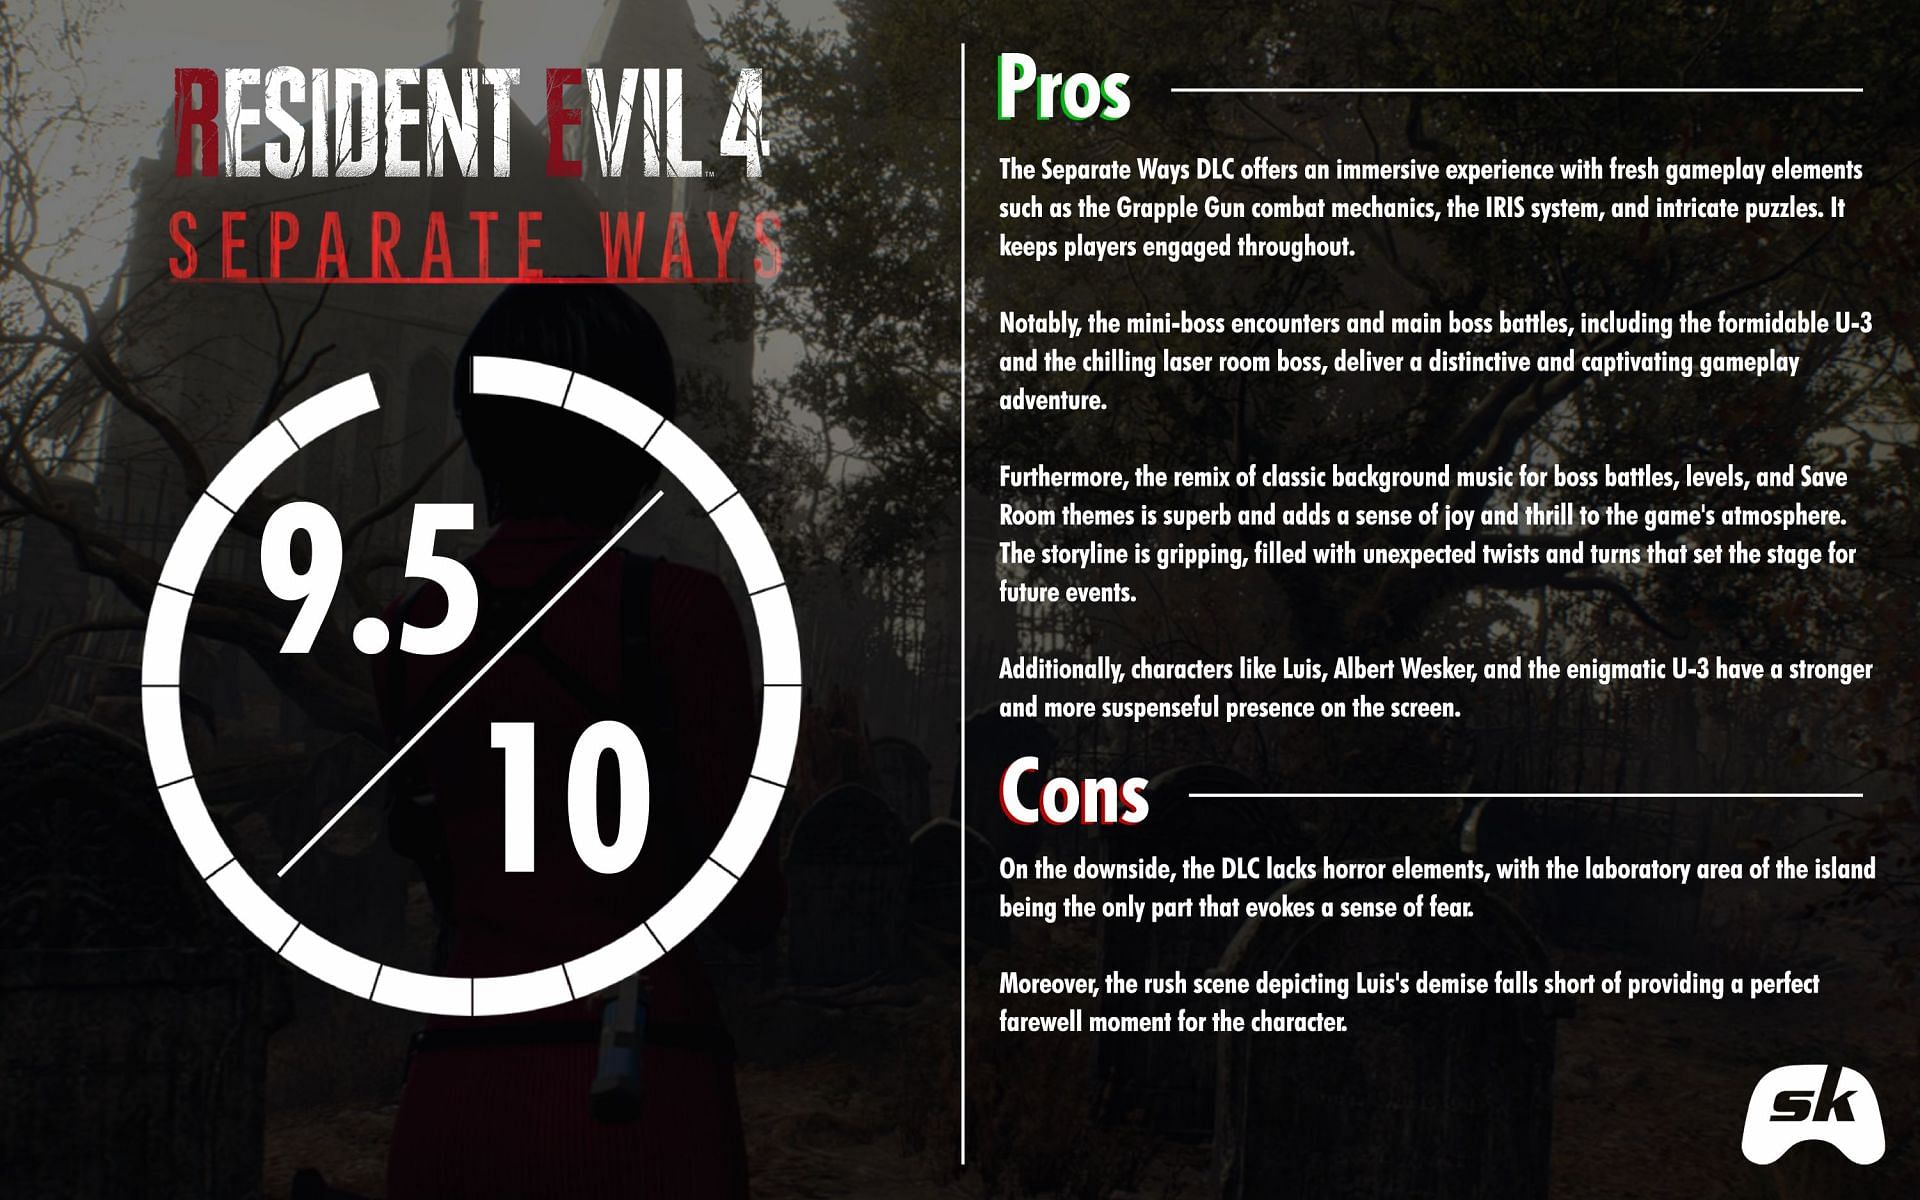 Resident Evil 4 Separate Ways DLC Review - Go Your Own Way - Game Informer